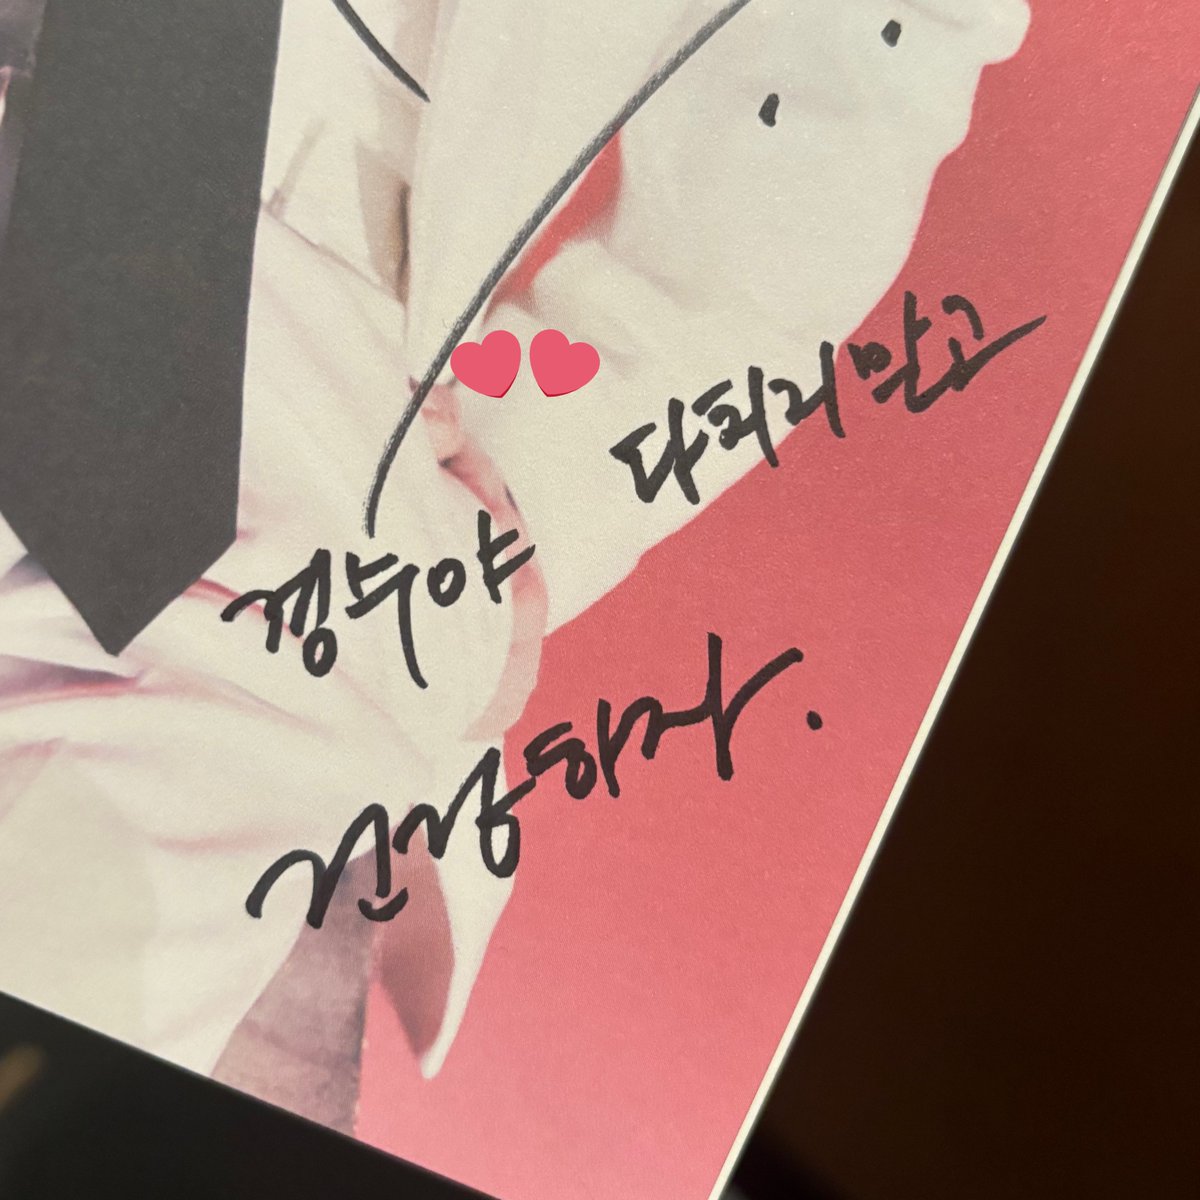 OP asked Kyungsoo to writes anything that he wants to say to himself, so he writes 'Kyungsoo-yah, don't get hurt and let's be healthy' 😭😭😭